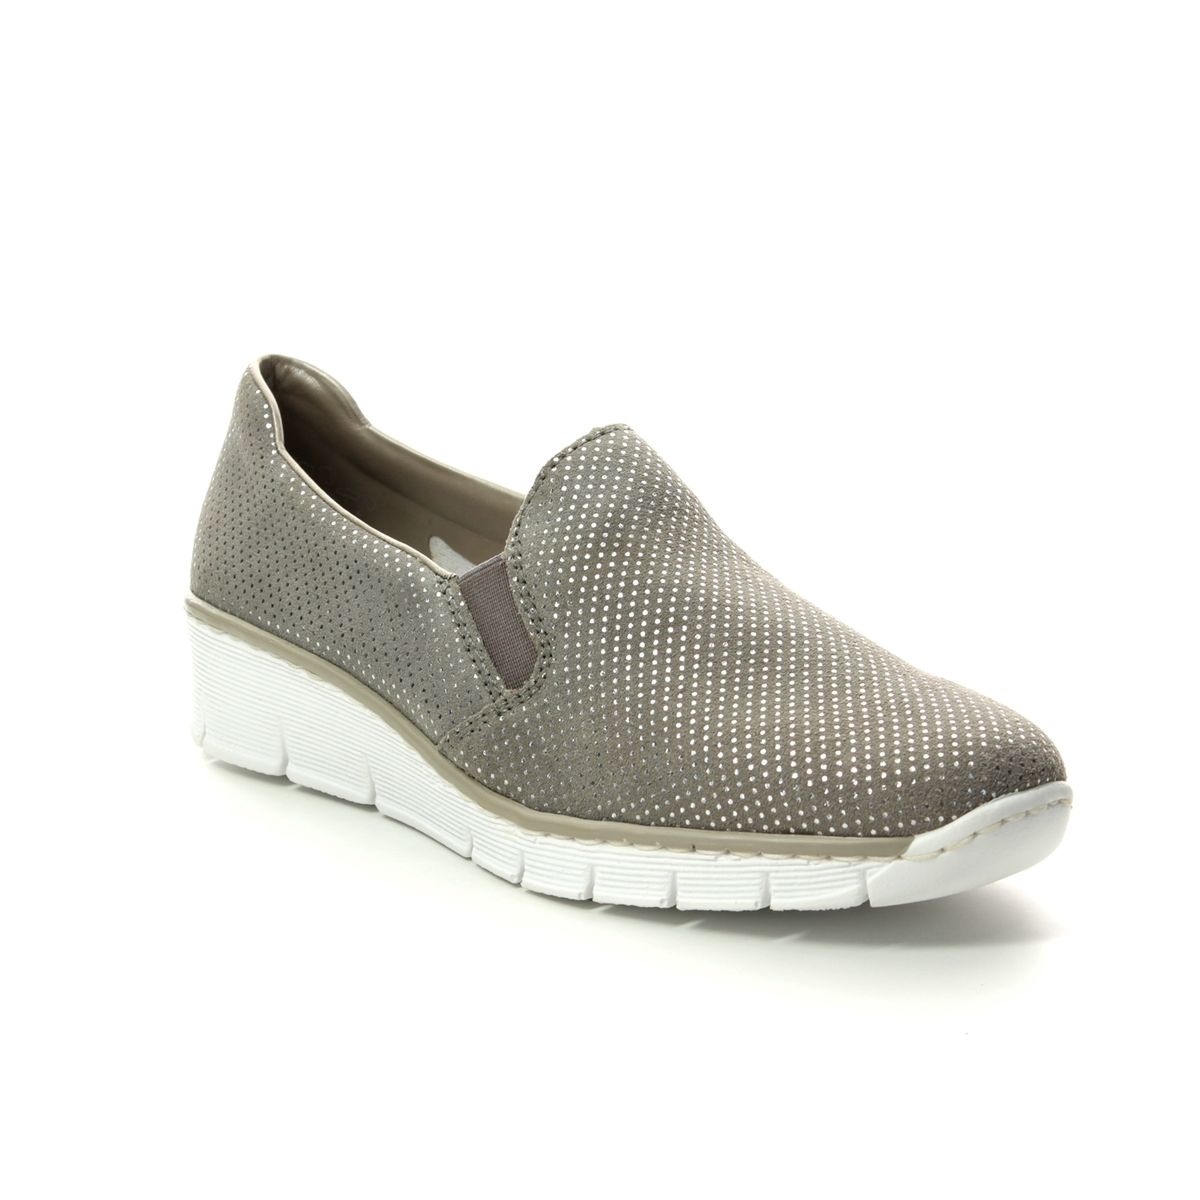 Rieker Bocciago Light Taupe Womens Comfort Slip On Shoes 53766-41 In Size 38 In Plain Light Taupe